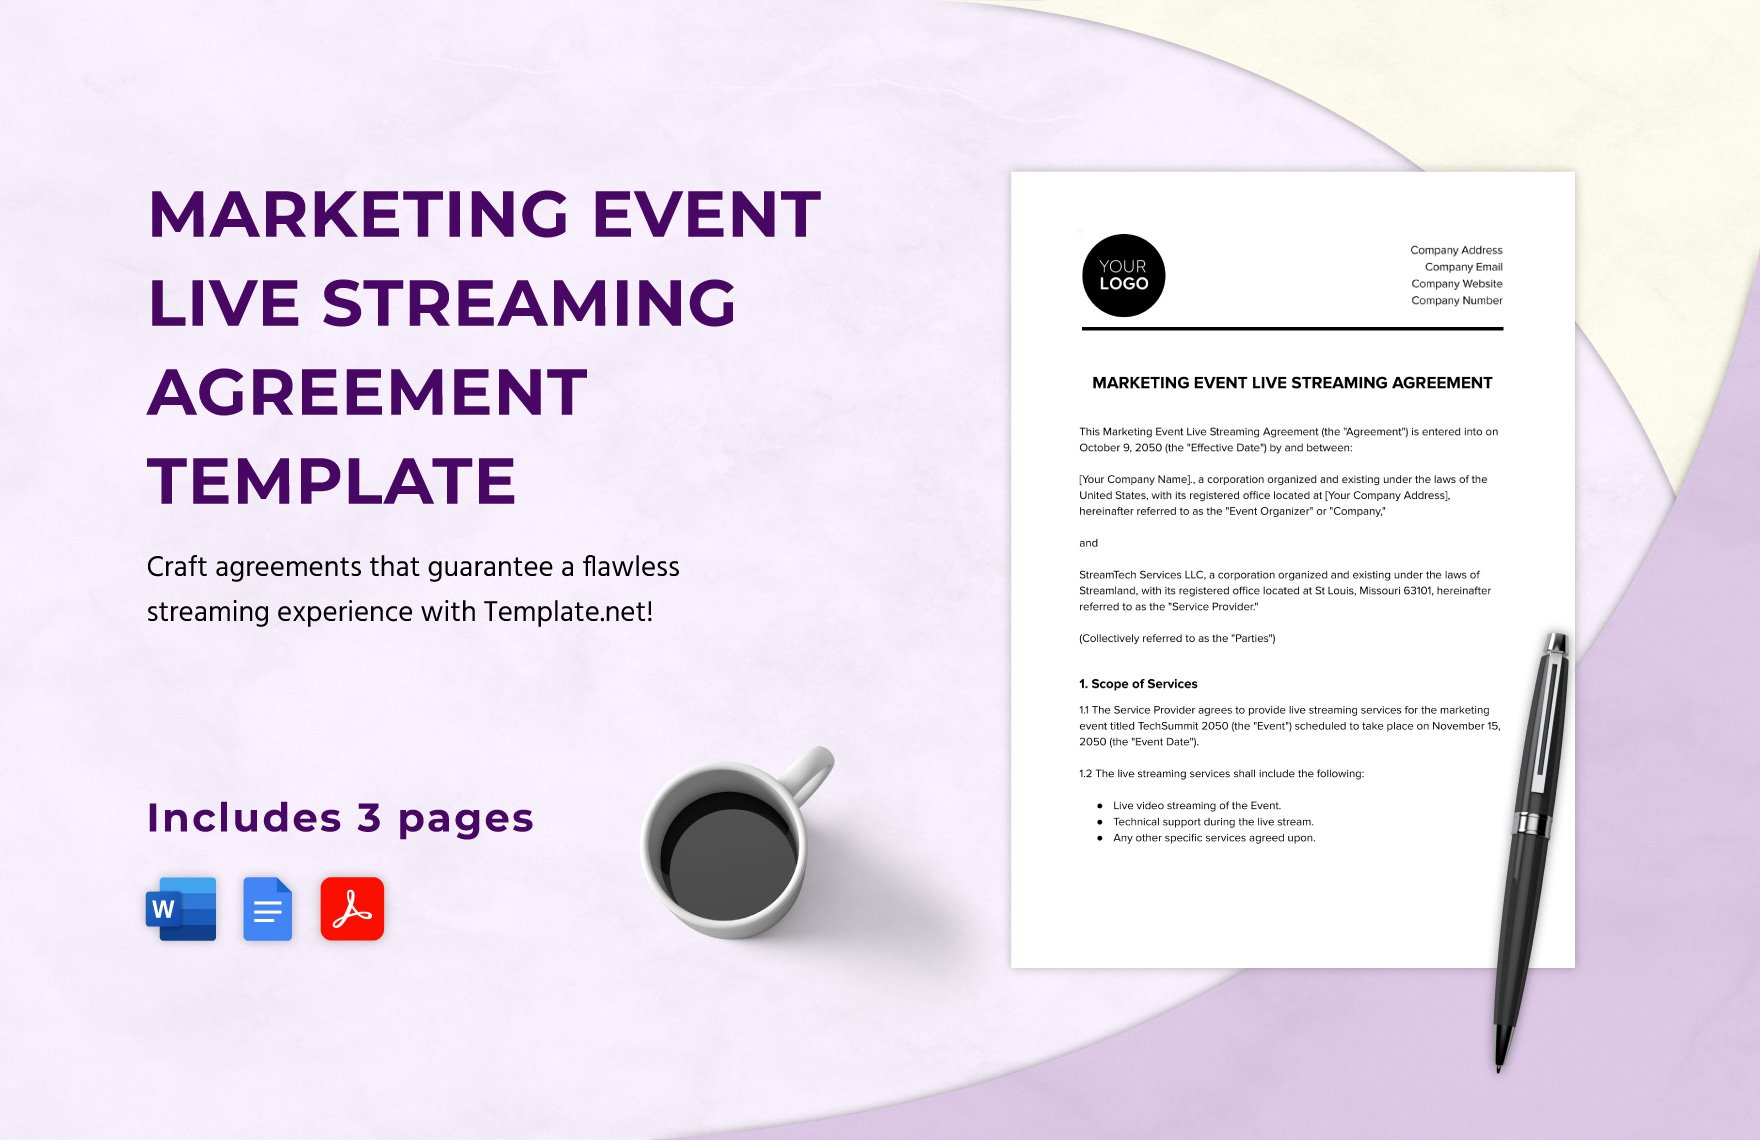 Marketing Event Live Streaming Agreement Template in Word, Google Docs, PDF